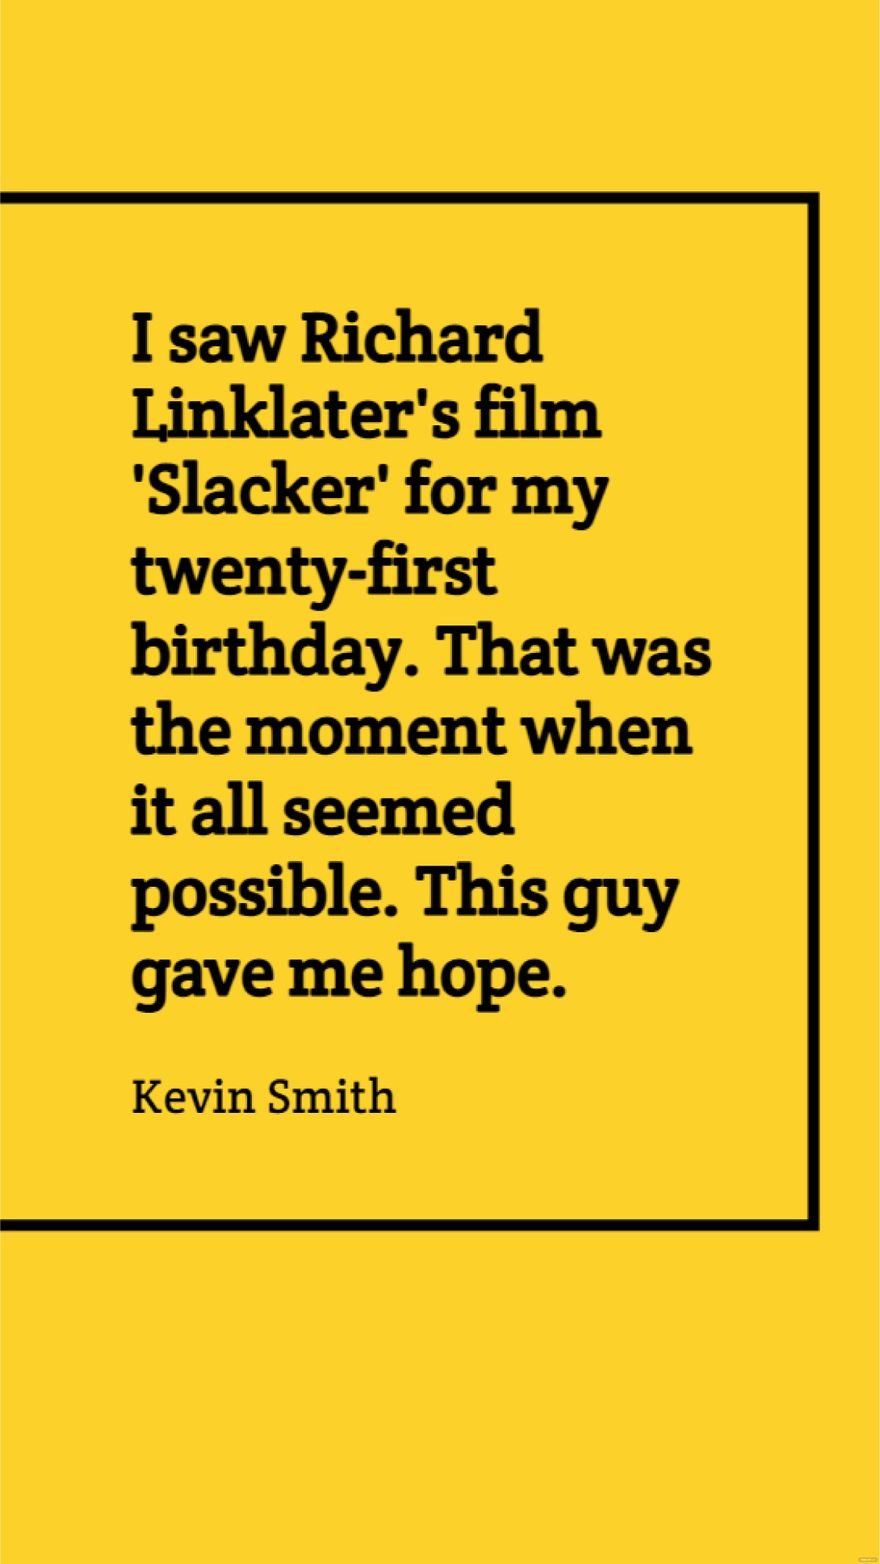 Free Kevin Smith - I saw Richard Linklater's film 'Slacker' for my twenty-first birthday. That was the moment when it all seemed possible. This guy gave me hope.